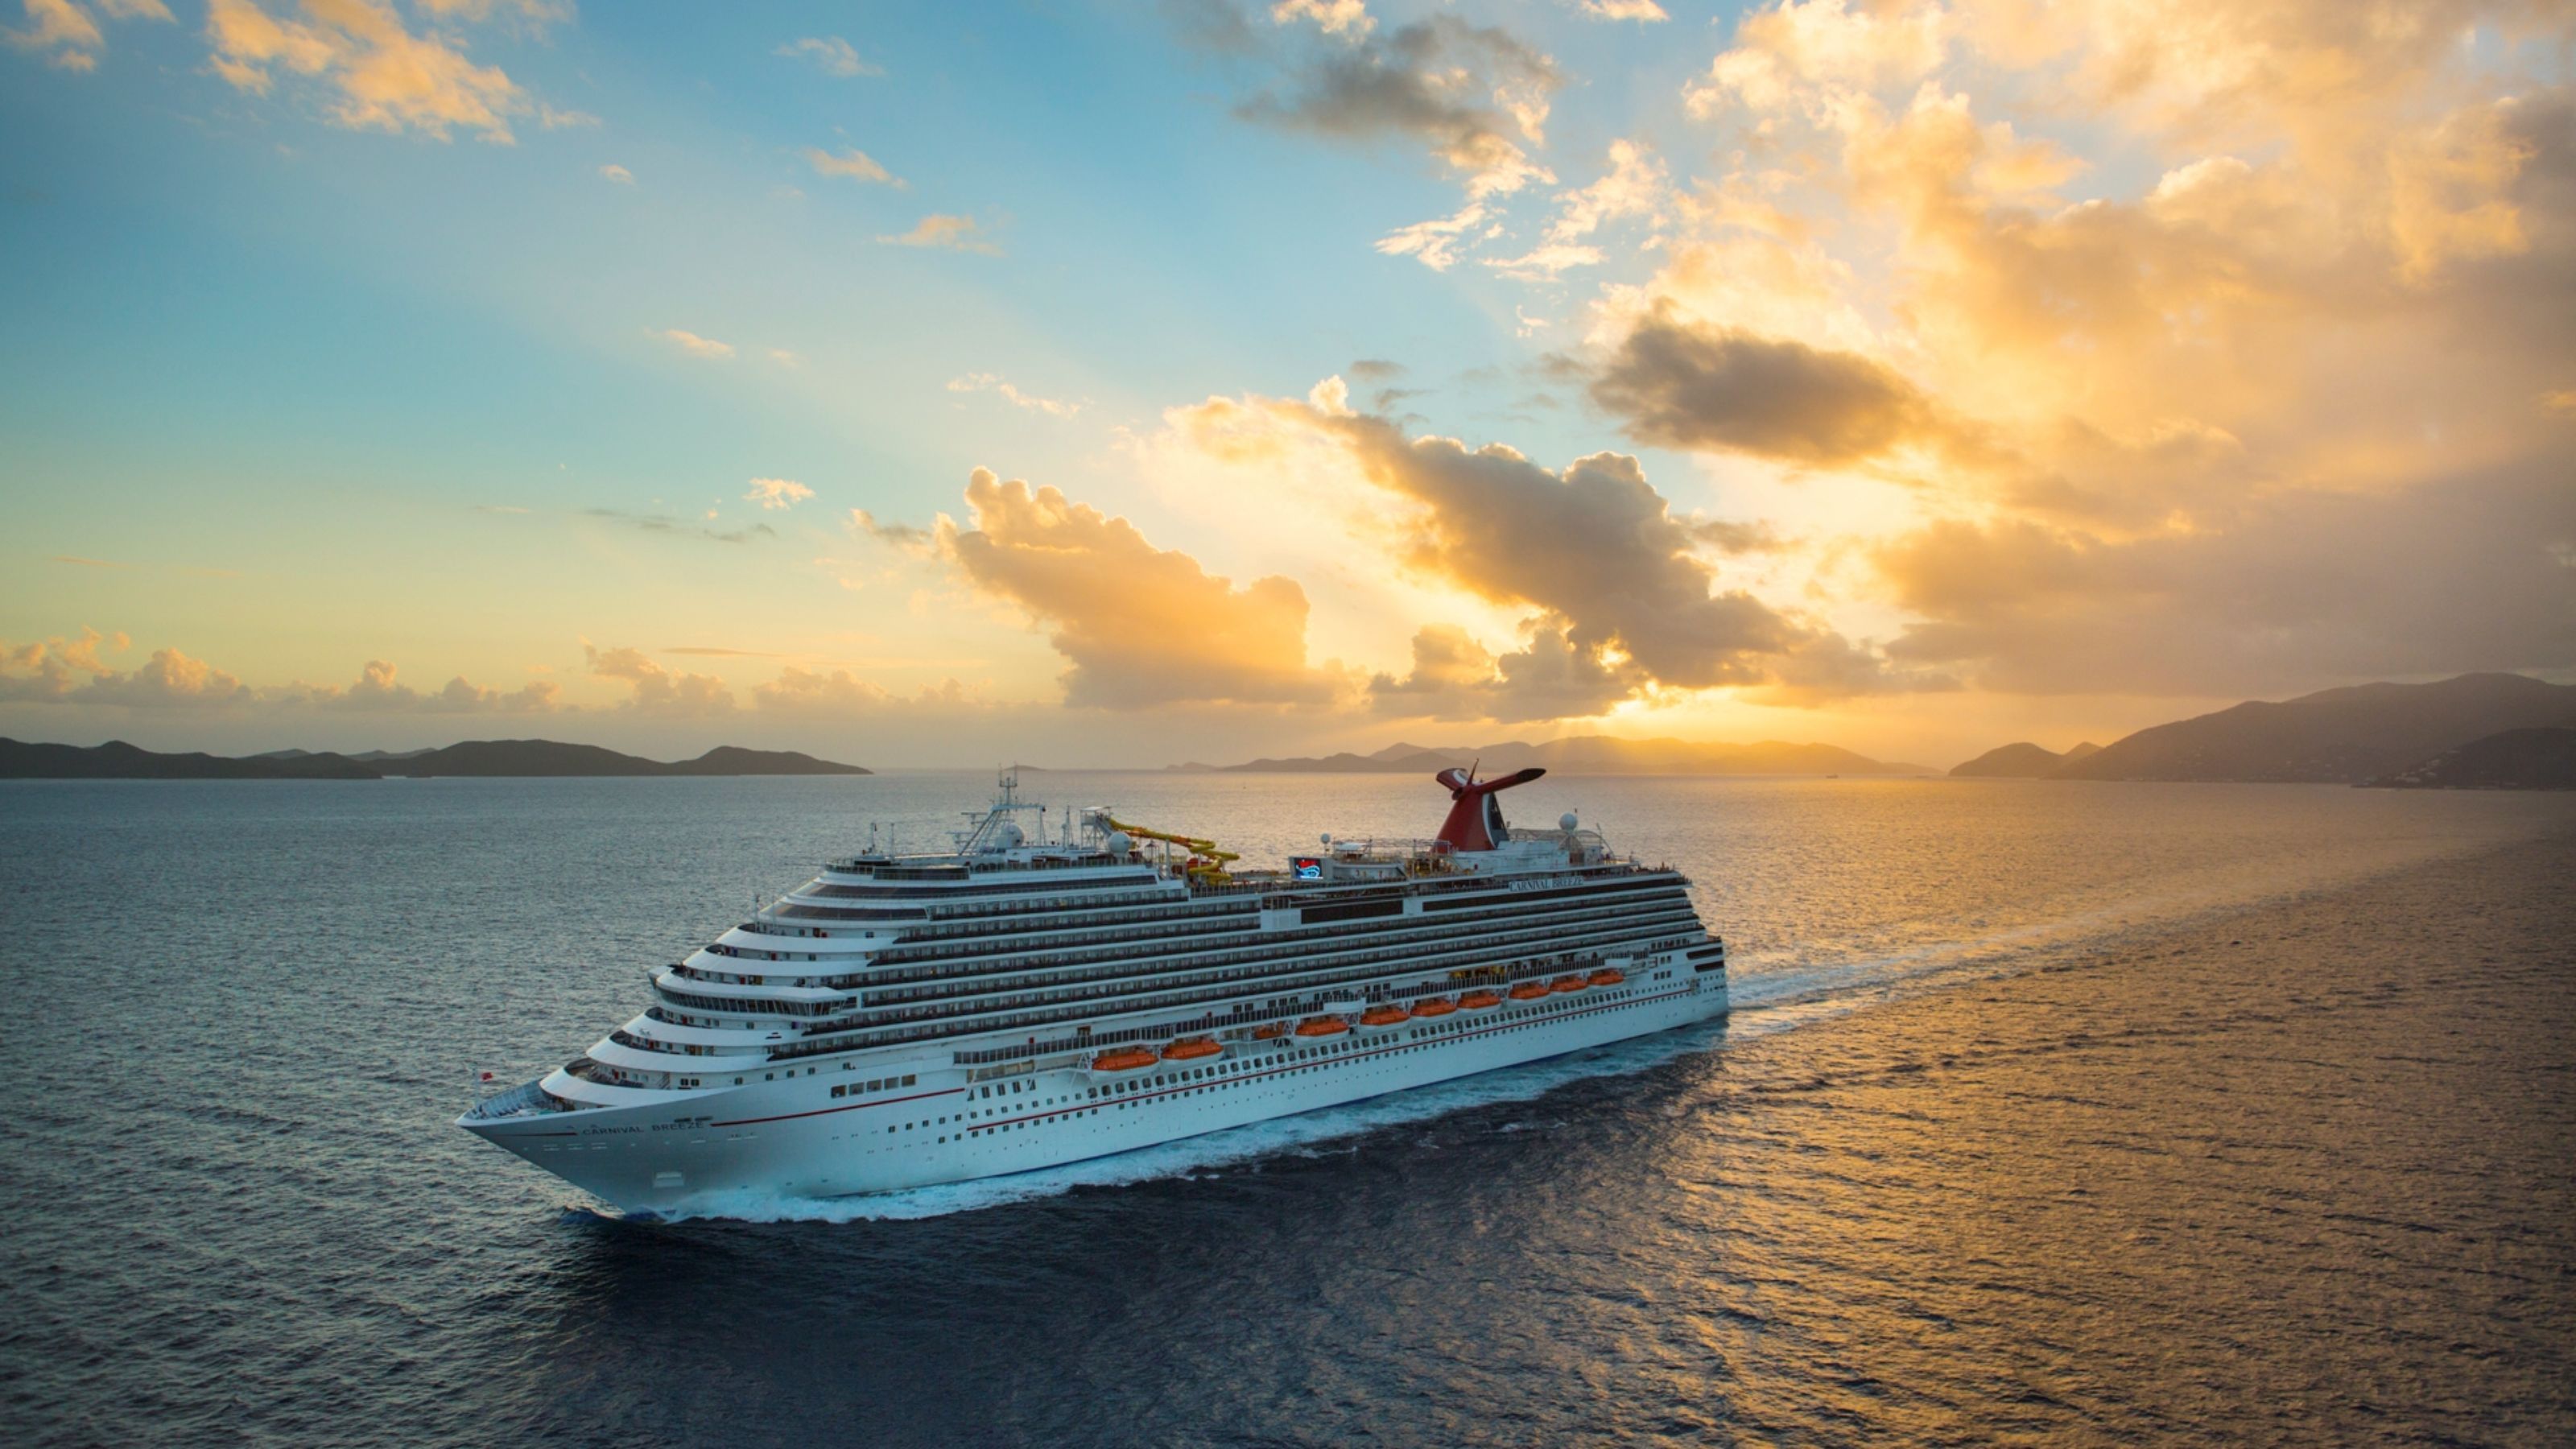 Vehicles Carnival Breeze HD Wallpaper | Background Image